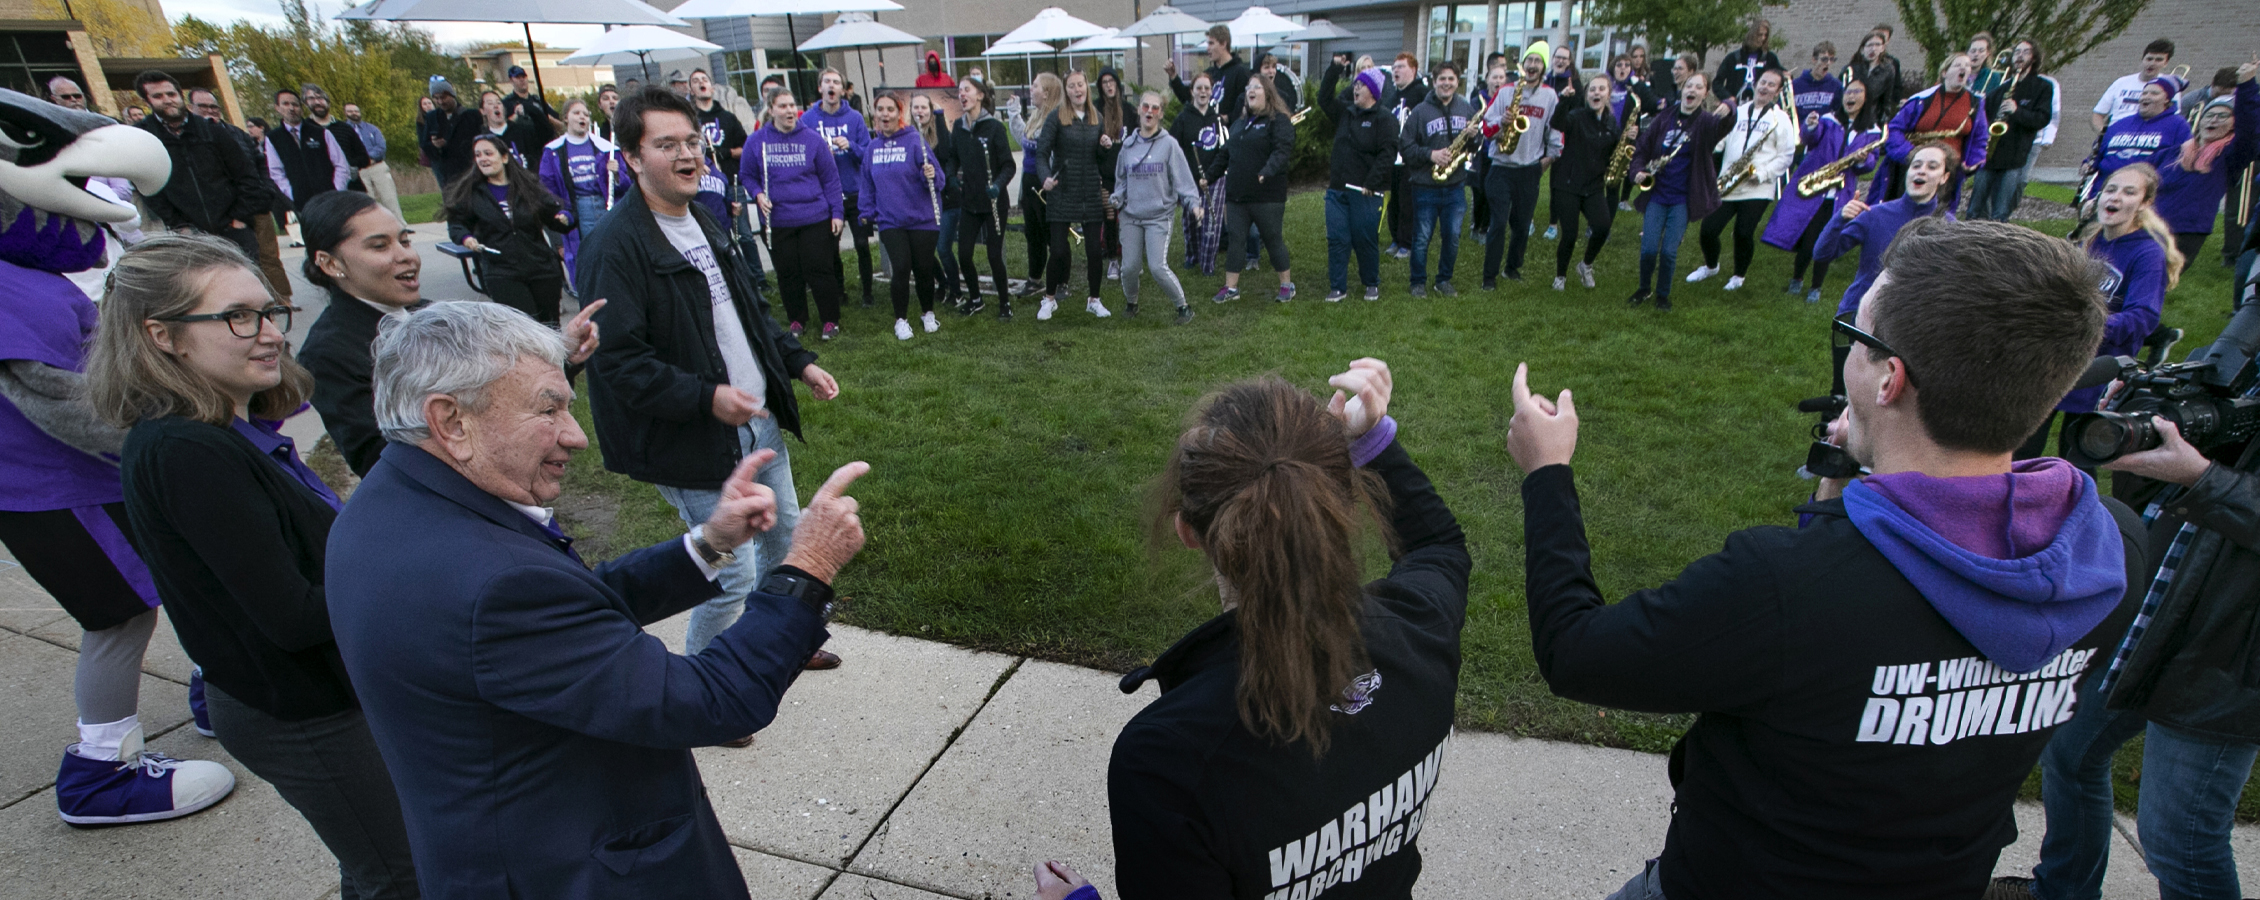 Tommy Thompson learns the Warhawk Strut from the Marching Band.